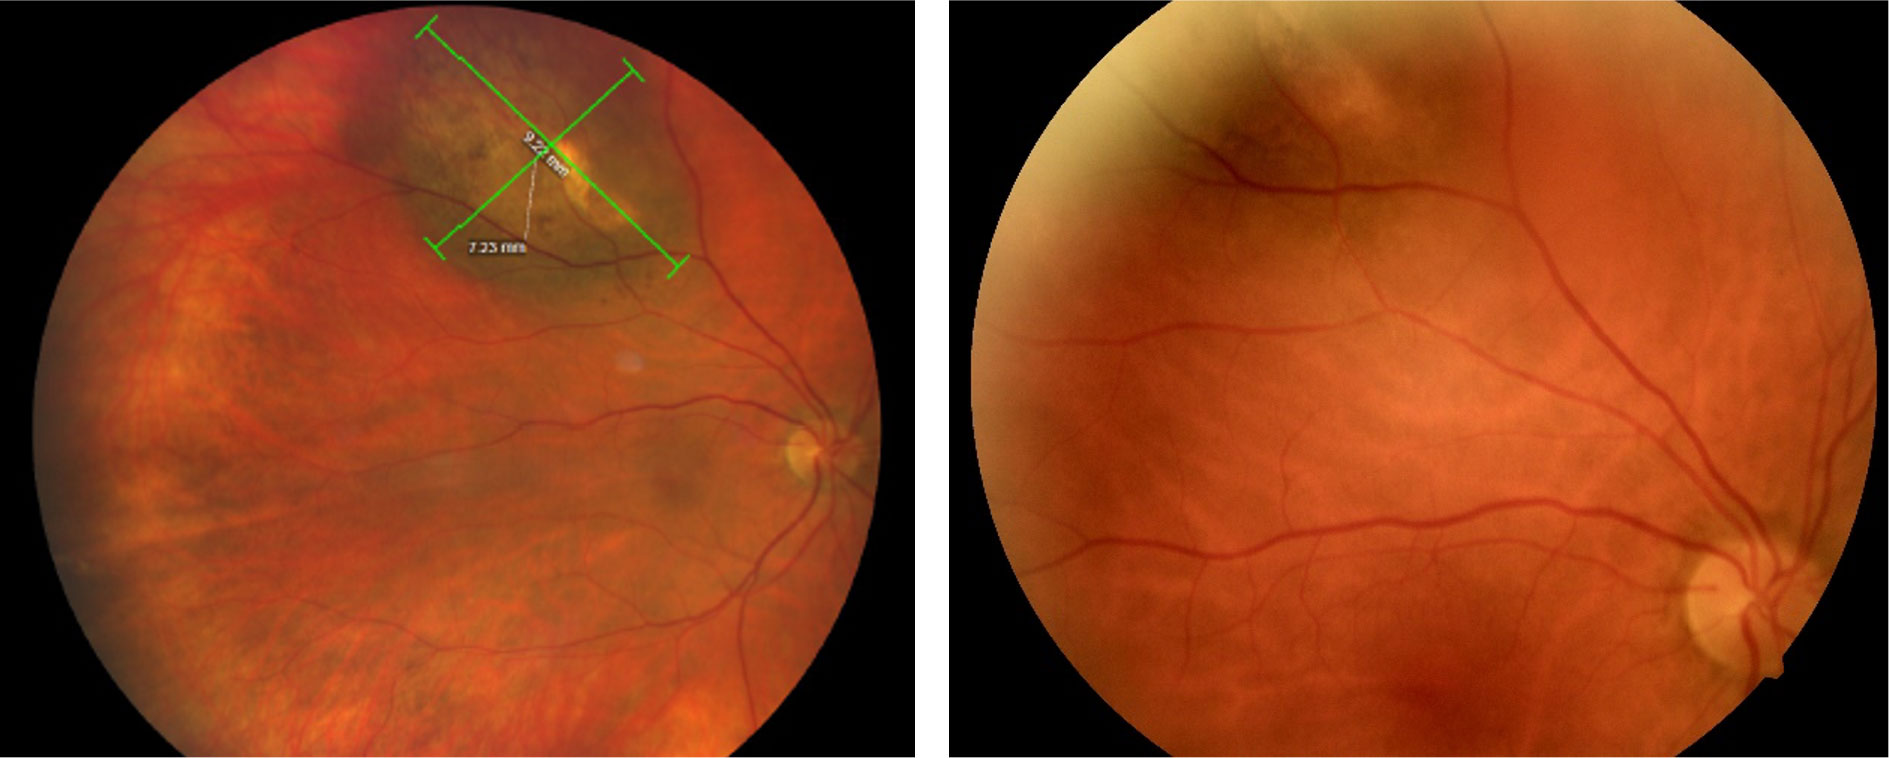 Figure 1a: (Left) Wide-field color fundus photography of pigmented choroidal tumor of the right eye upon 2020 evaluation.  Tumor size measured 9.22mm x.7.23mm.  Figure 1b: (Right) Standard fundus photography taken 16 months prior (2018) .  Comparison between the two demonstrates obvious expansion of the tumor with the posterior margin now extending past the venous bifurcation and reaching closer to the optic nerve.